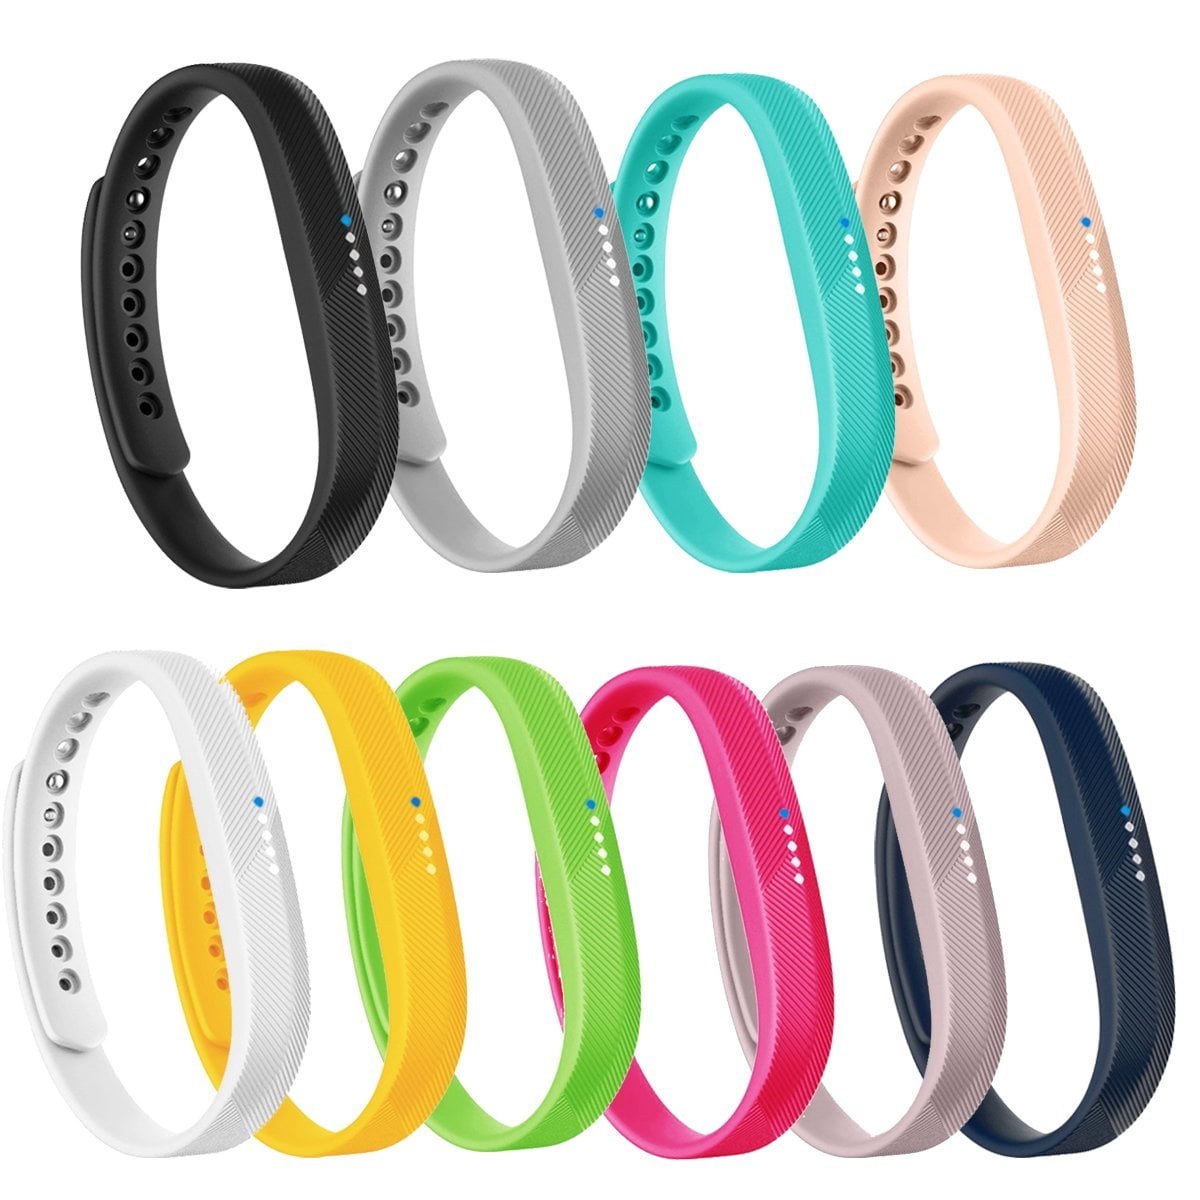 COLORS SUPER 10PK Wristband Band Strap Bracelet Accessories For FITBIT CHARGE 2 